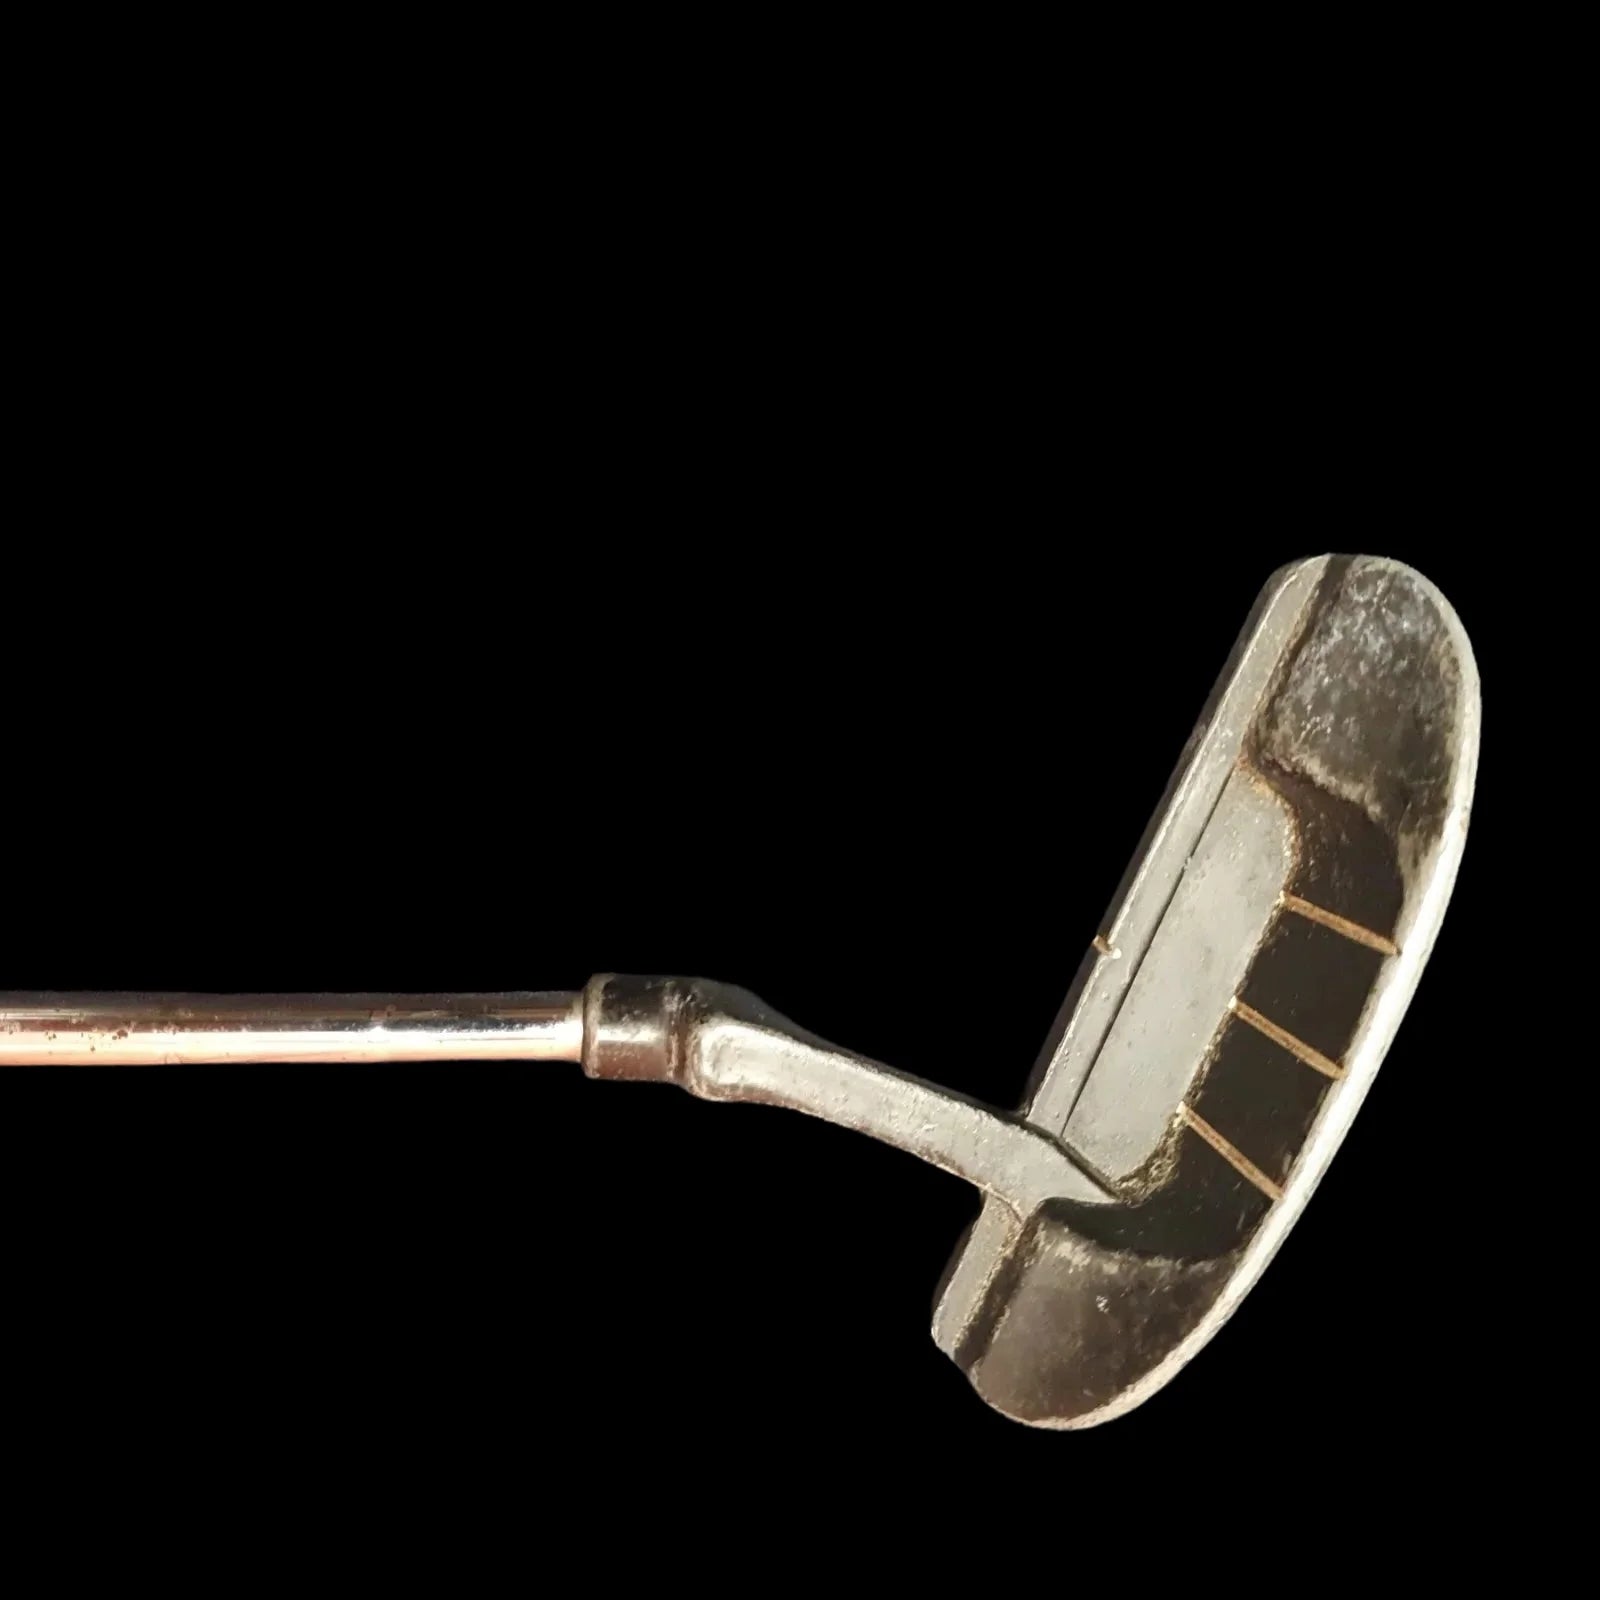 Palm Springs Special Edition Putter - Golf Clubs - 2 - 719